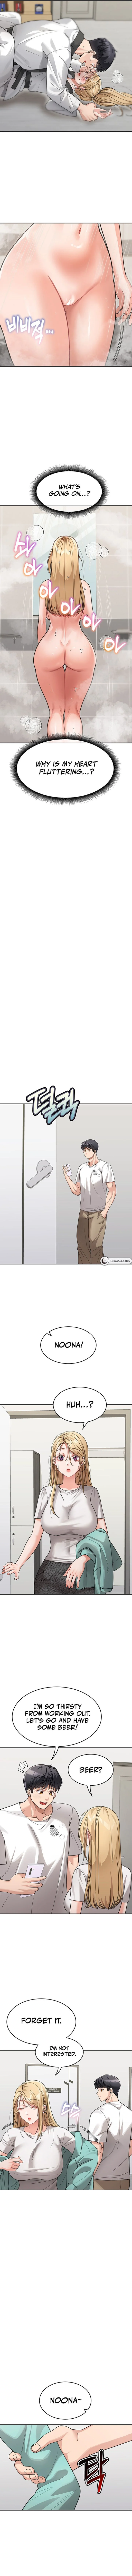 is-it-your-mother-or-sister-chap-31-3